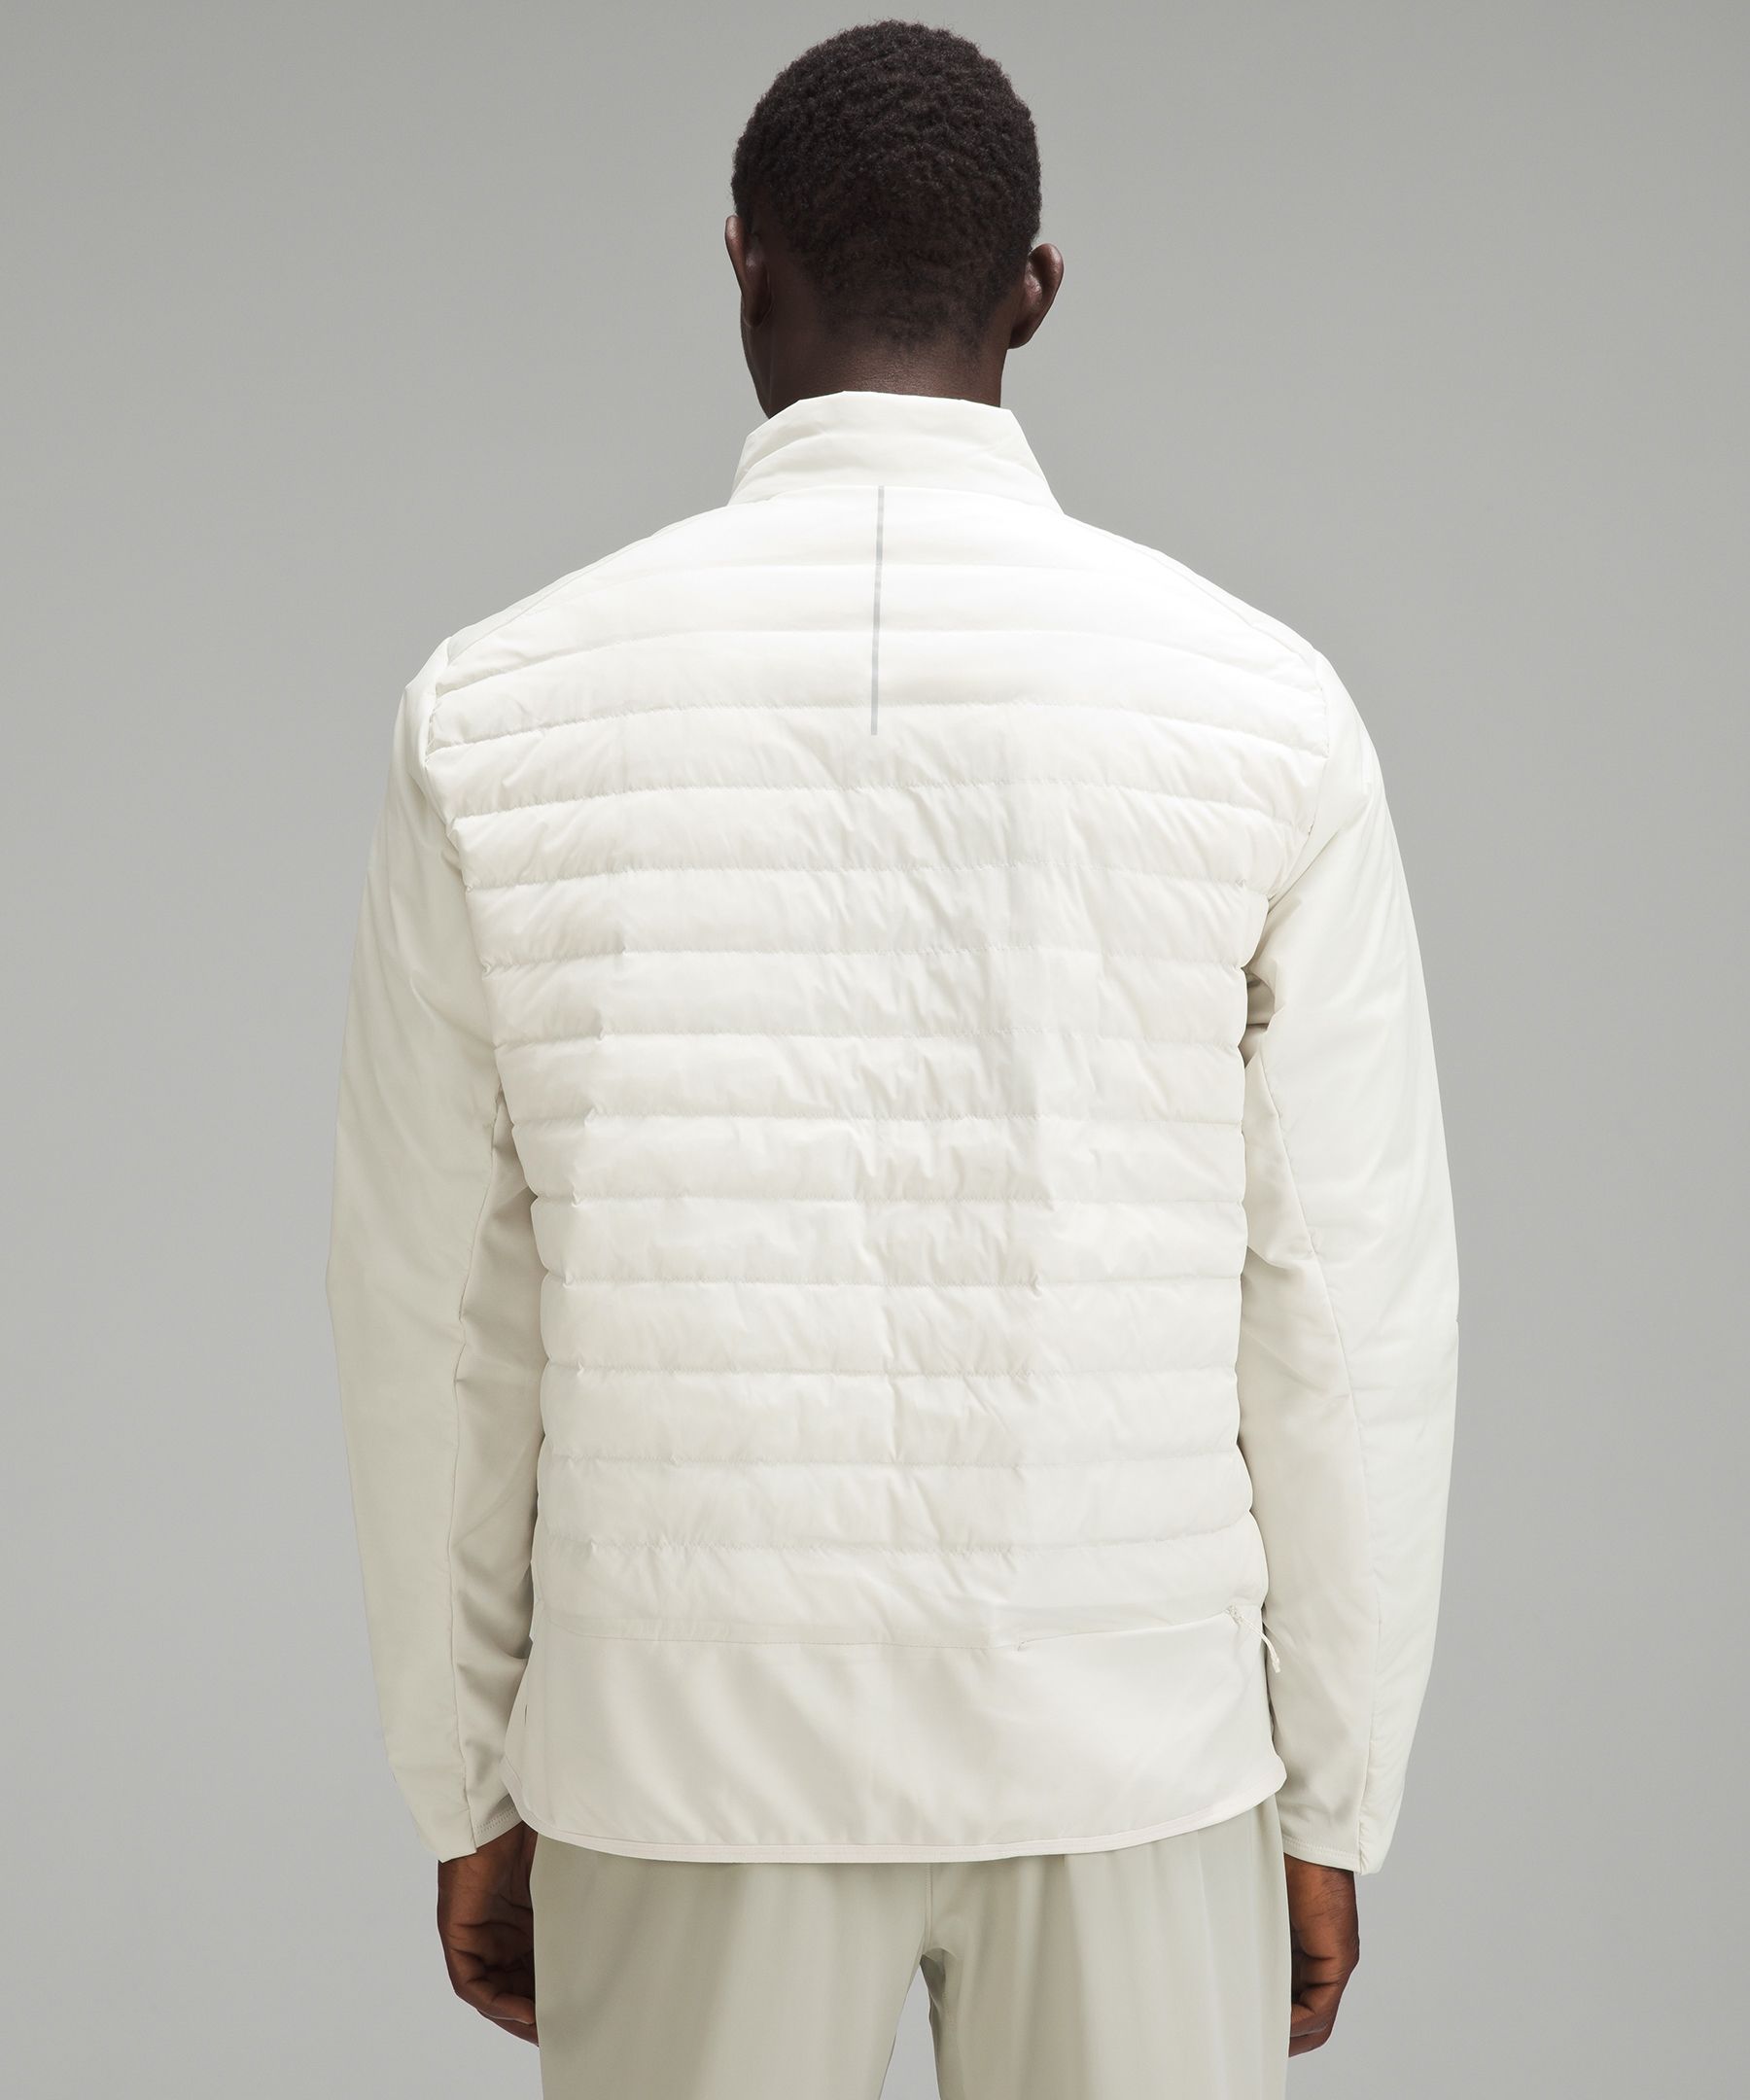 WMTM Lightweight run jacket in white and black emboss (both size